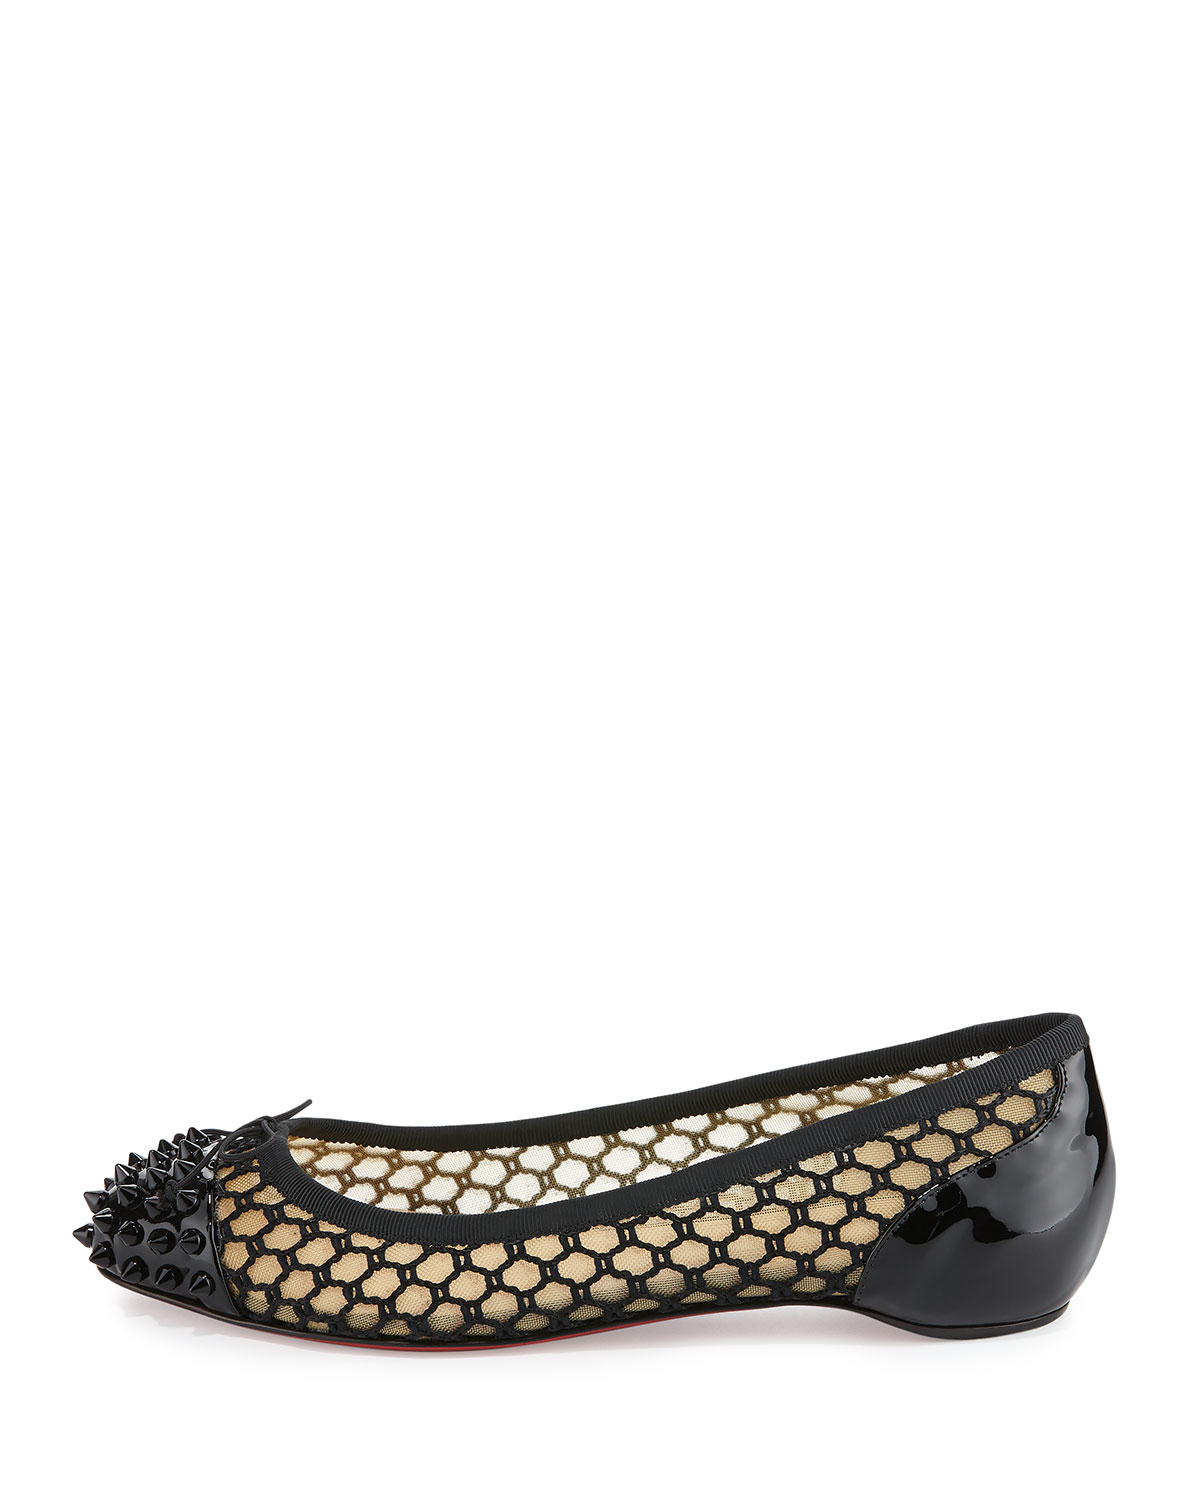 louboutin knock-off - Christian louboutin Mix Patent-Leather Ballet Flats in Black | Lyst